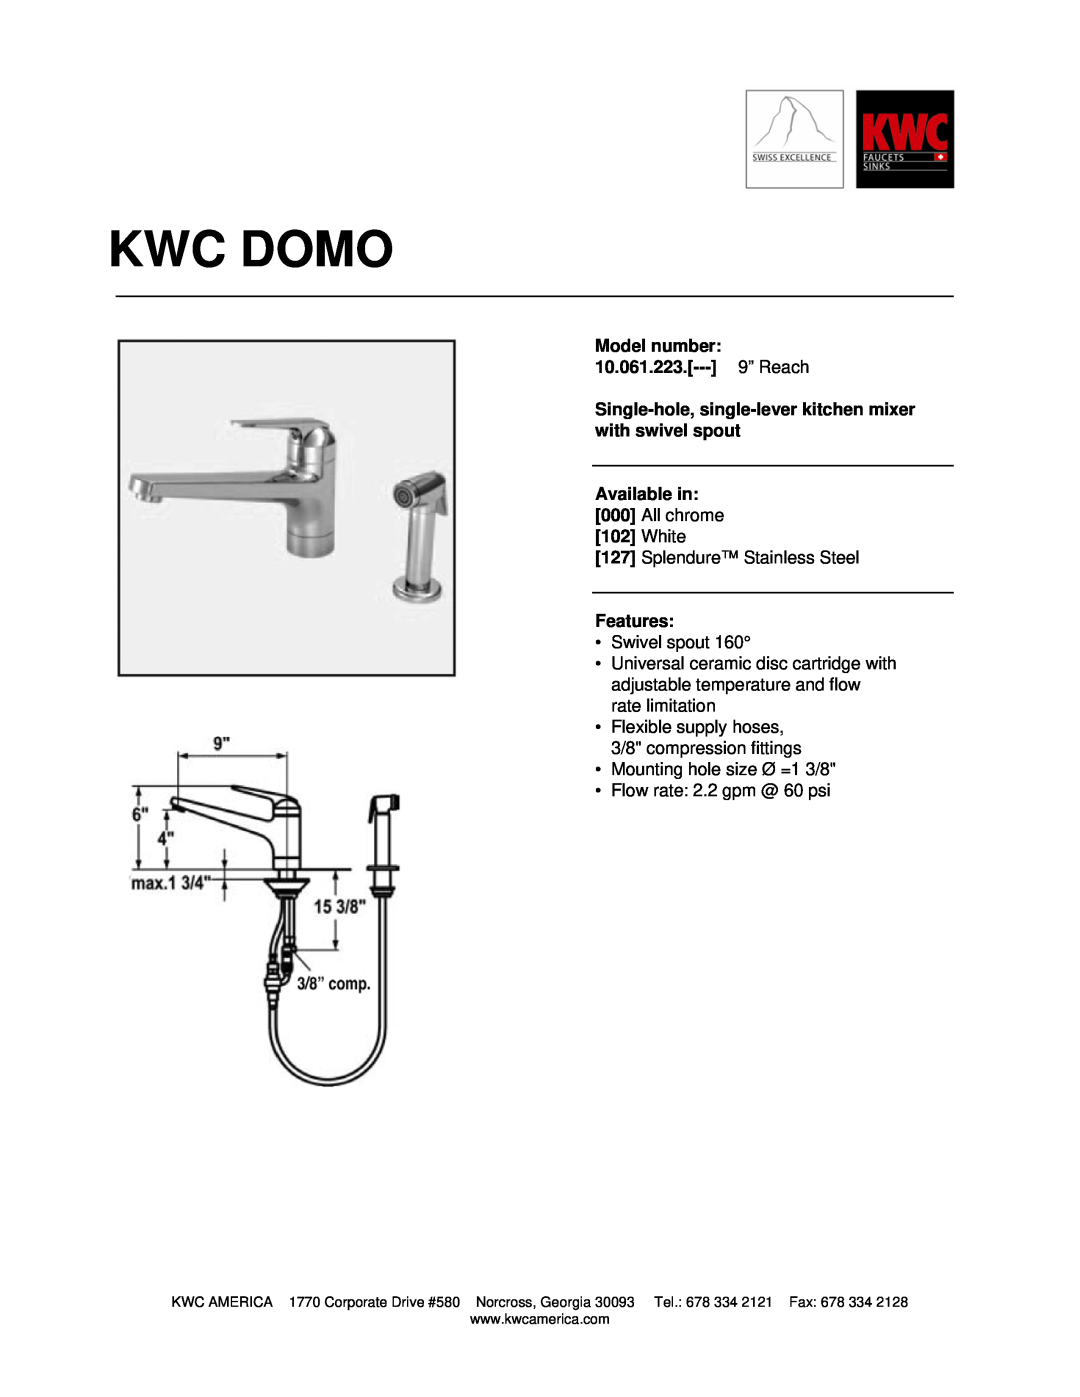 KWC manual Kwc Domo, Model number 10.061.223.--- 9” Reach, Available in, White, Features 